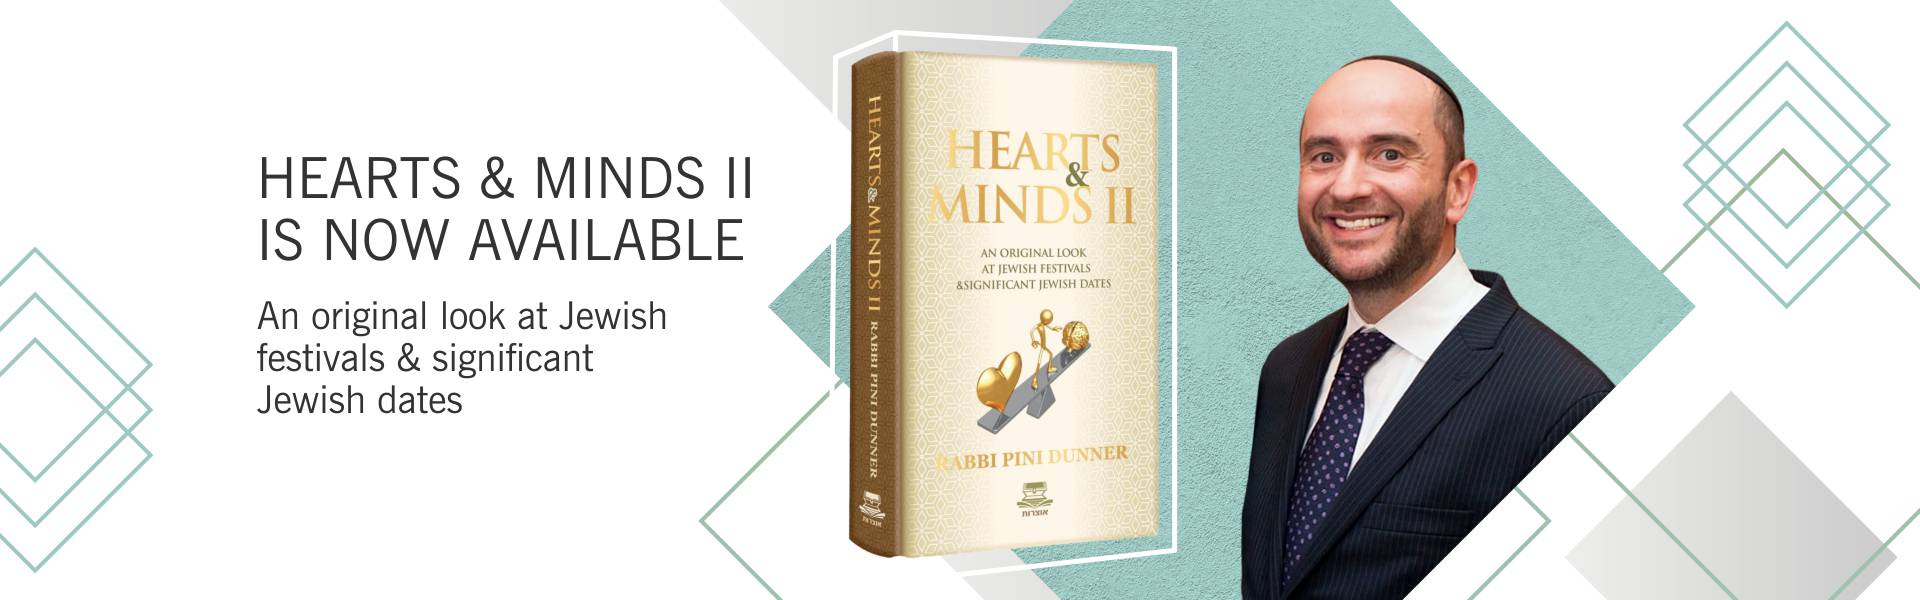 HEARTS & MINDS II IS NOW AVAILABLE